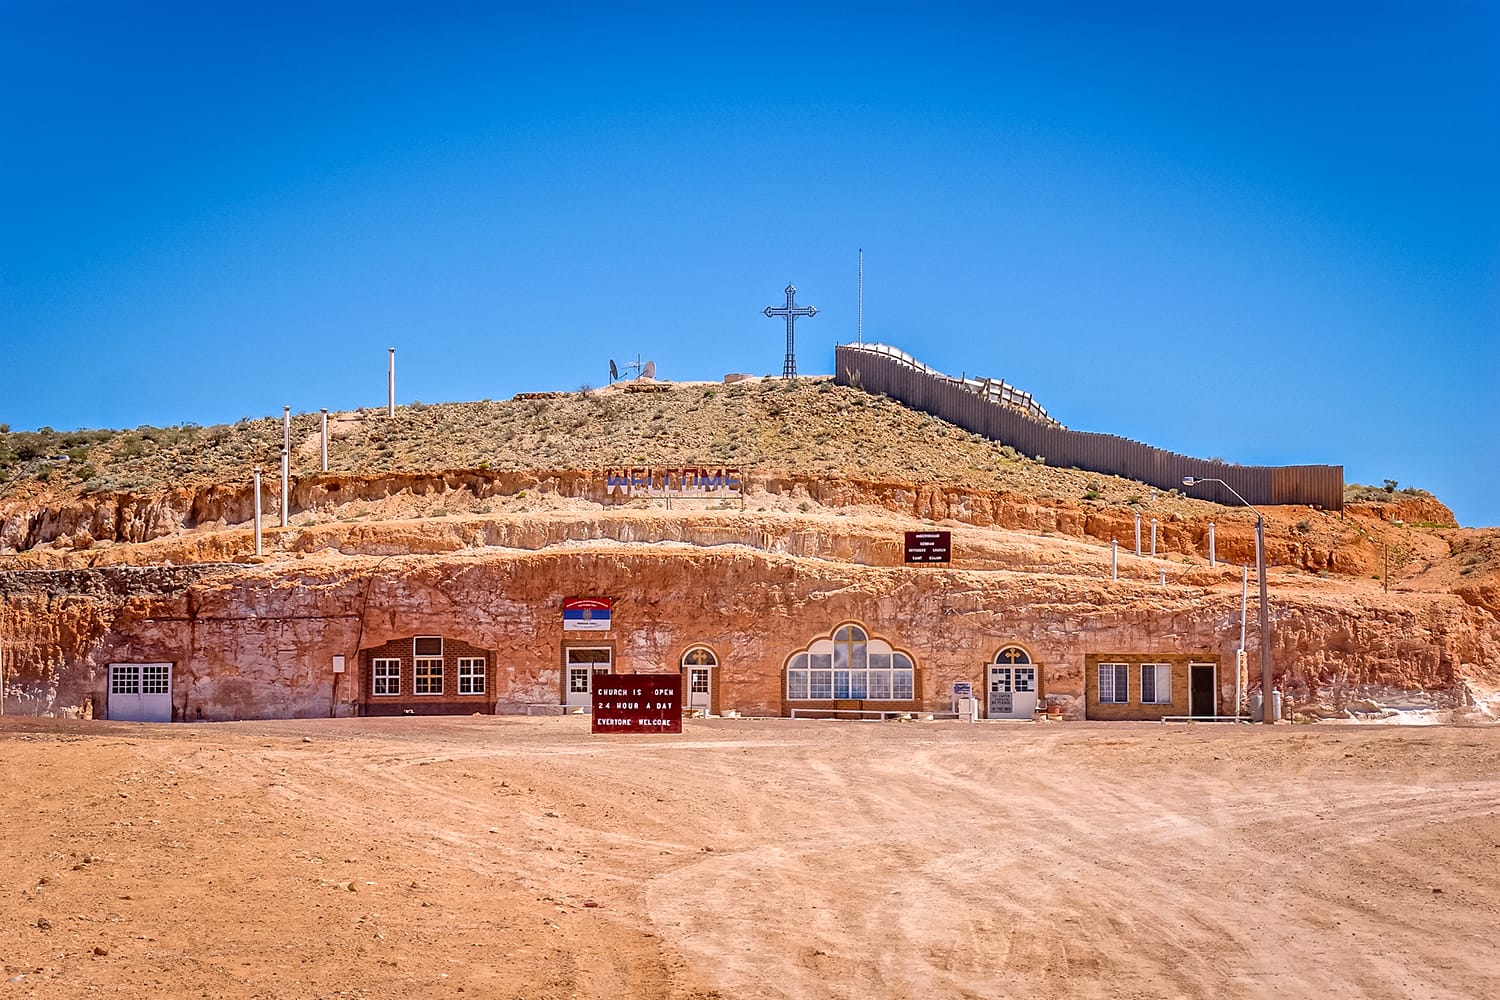 Underground Serbian Church. Coober Pedy is an opal mining town and known for its underground dwellings, built against the heat, known as dugouts. Australia.